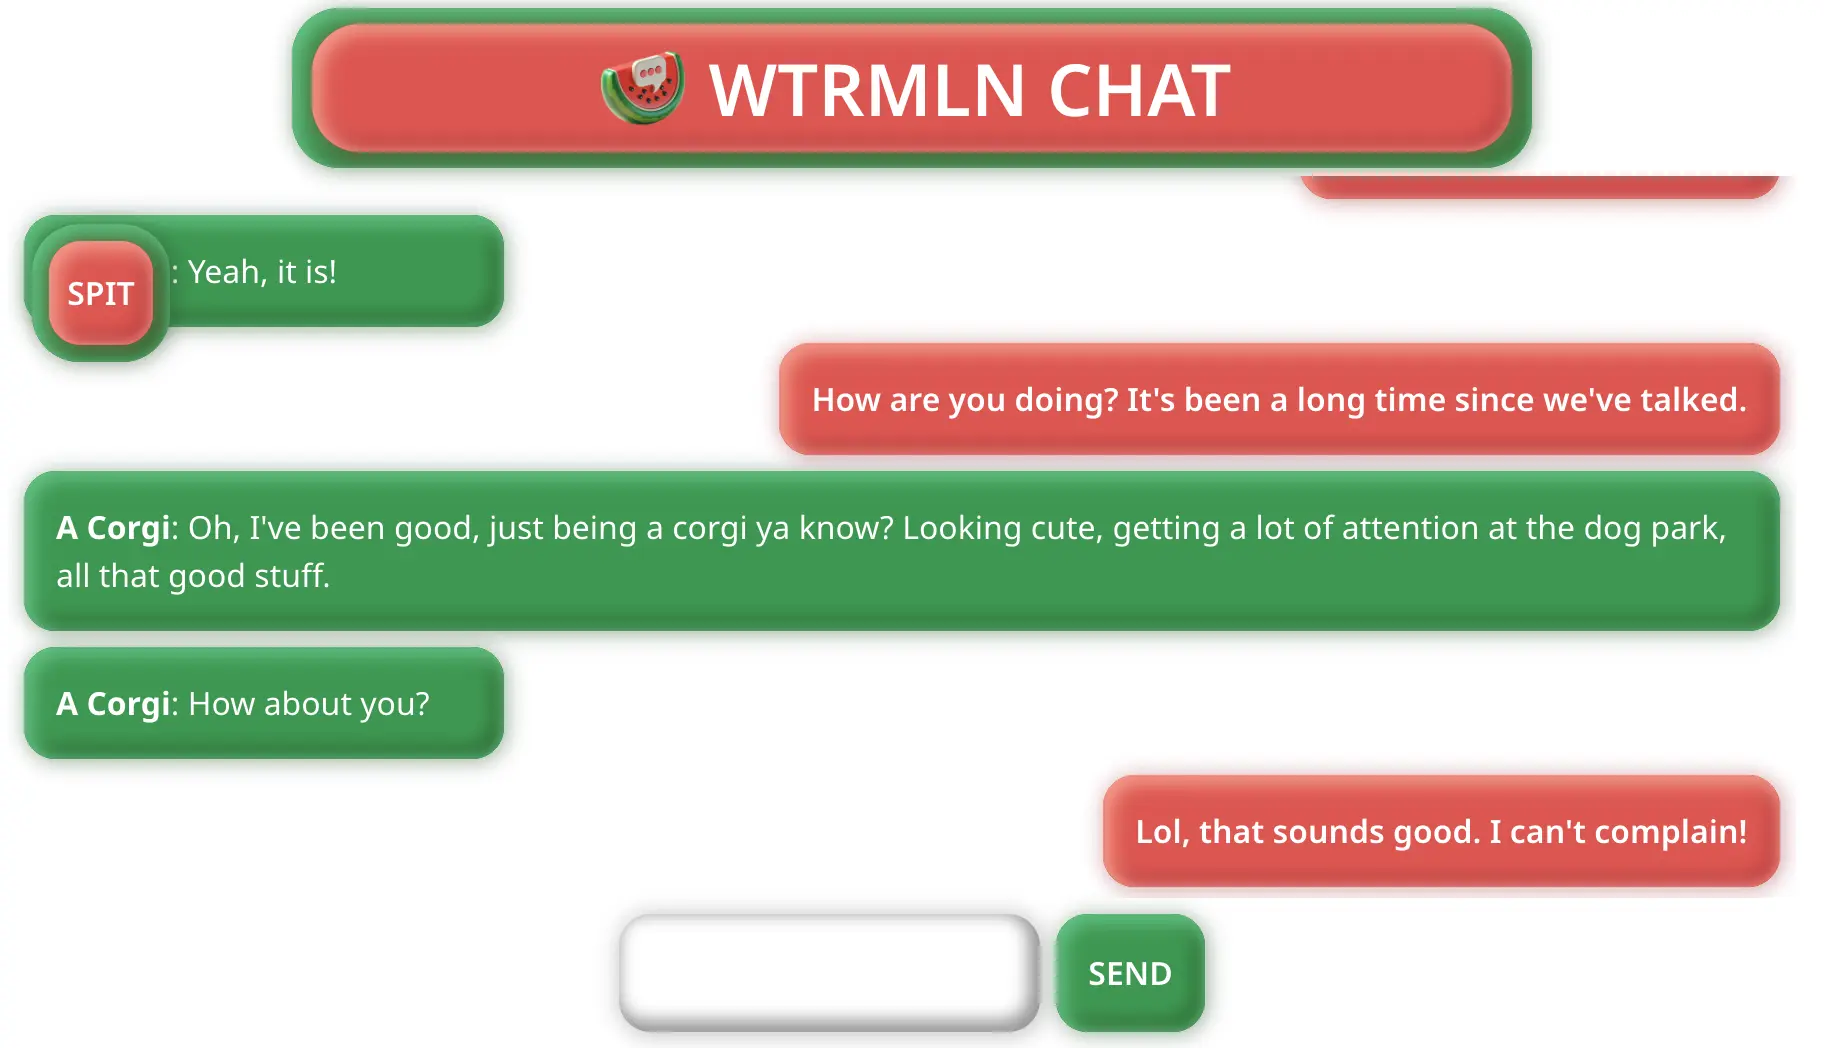 A screenshot of WTRMLN CHAT in action.